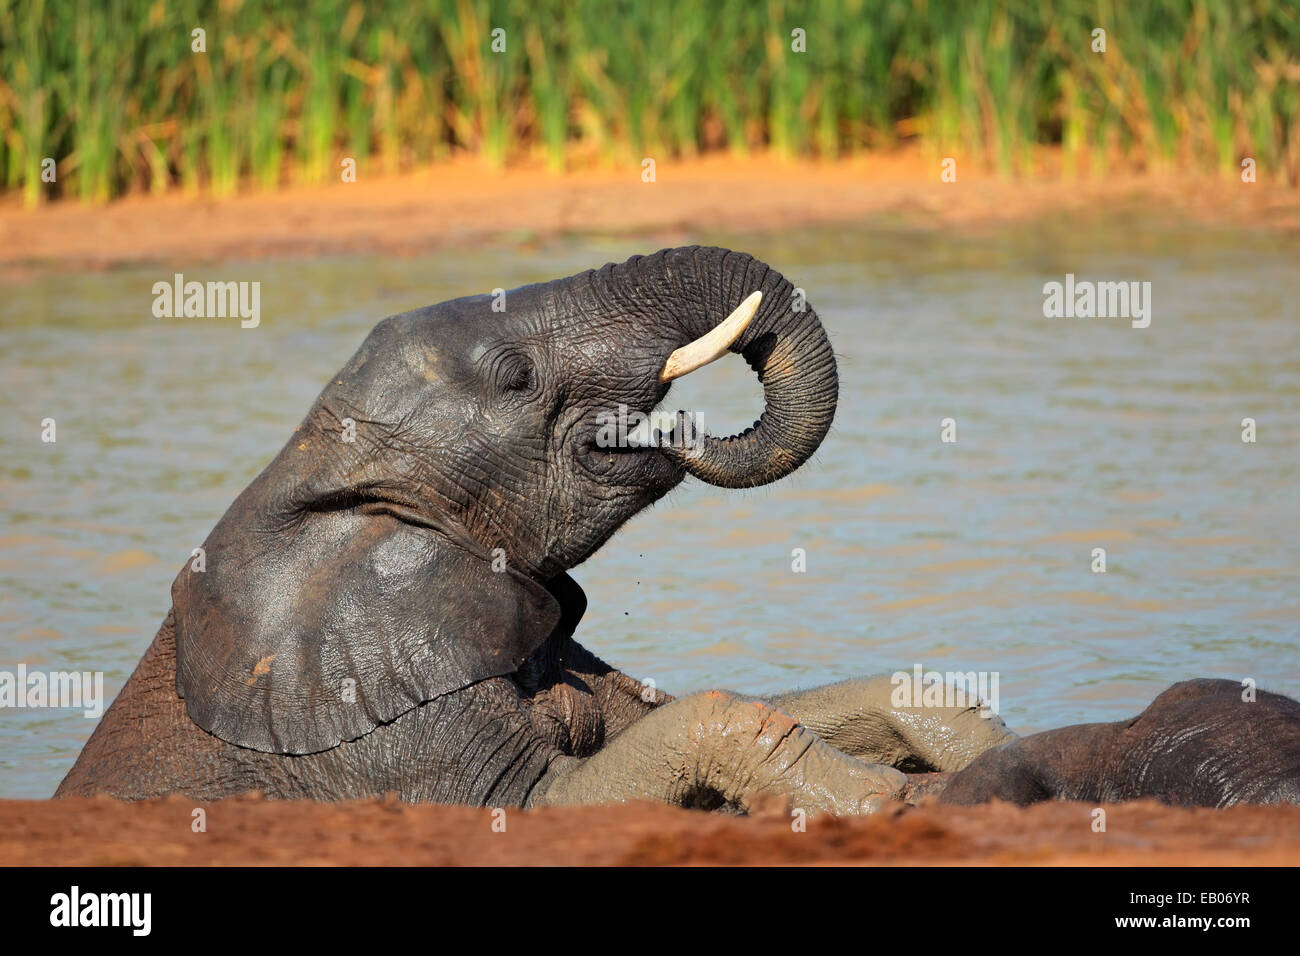 An African elephant (Loxodonta africana) playing in a waterhole, Addo Elephant National Park, South Africa Stock Photo